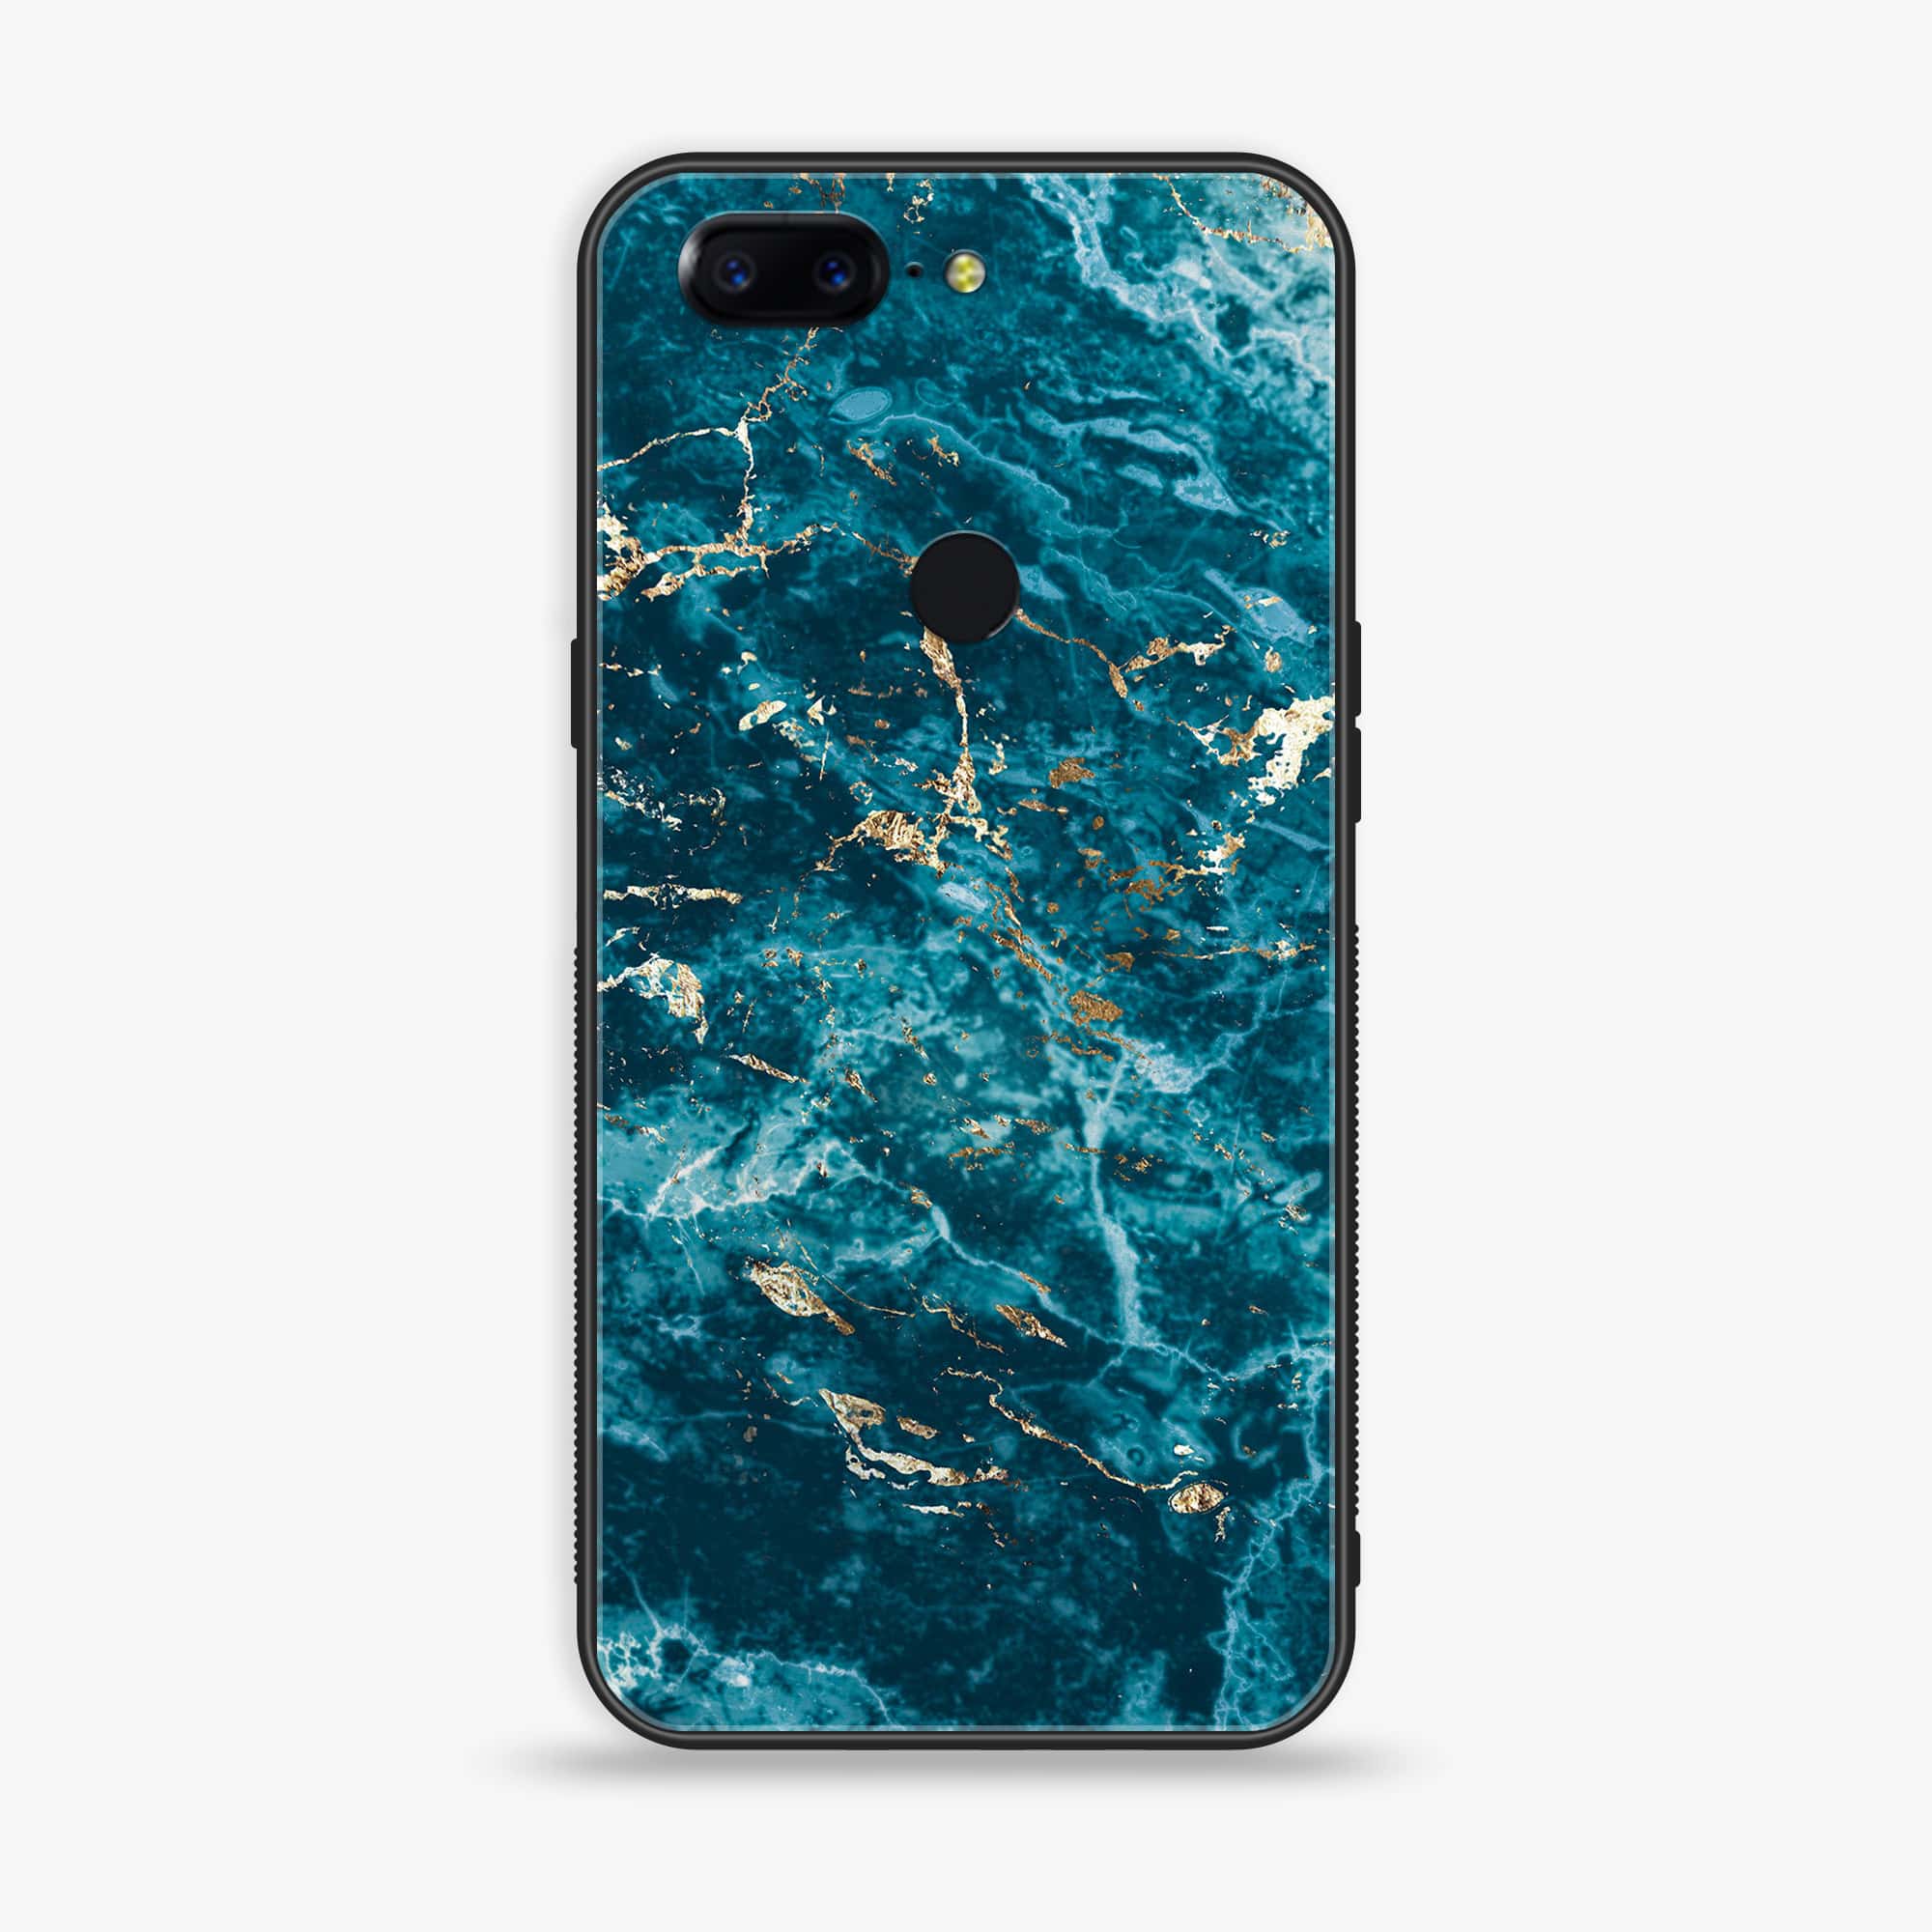 OnePlus 5T - Blue Marble Series V 2.0 - Premium Printed Glass soft Bumper shock Proof Case